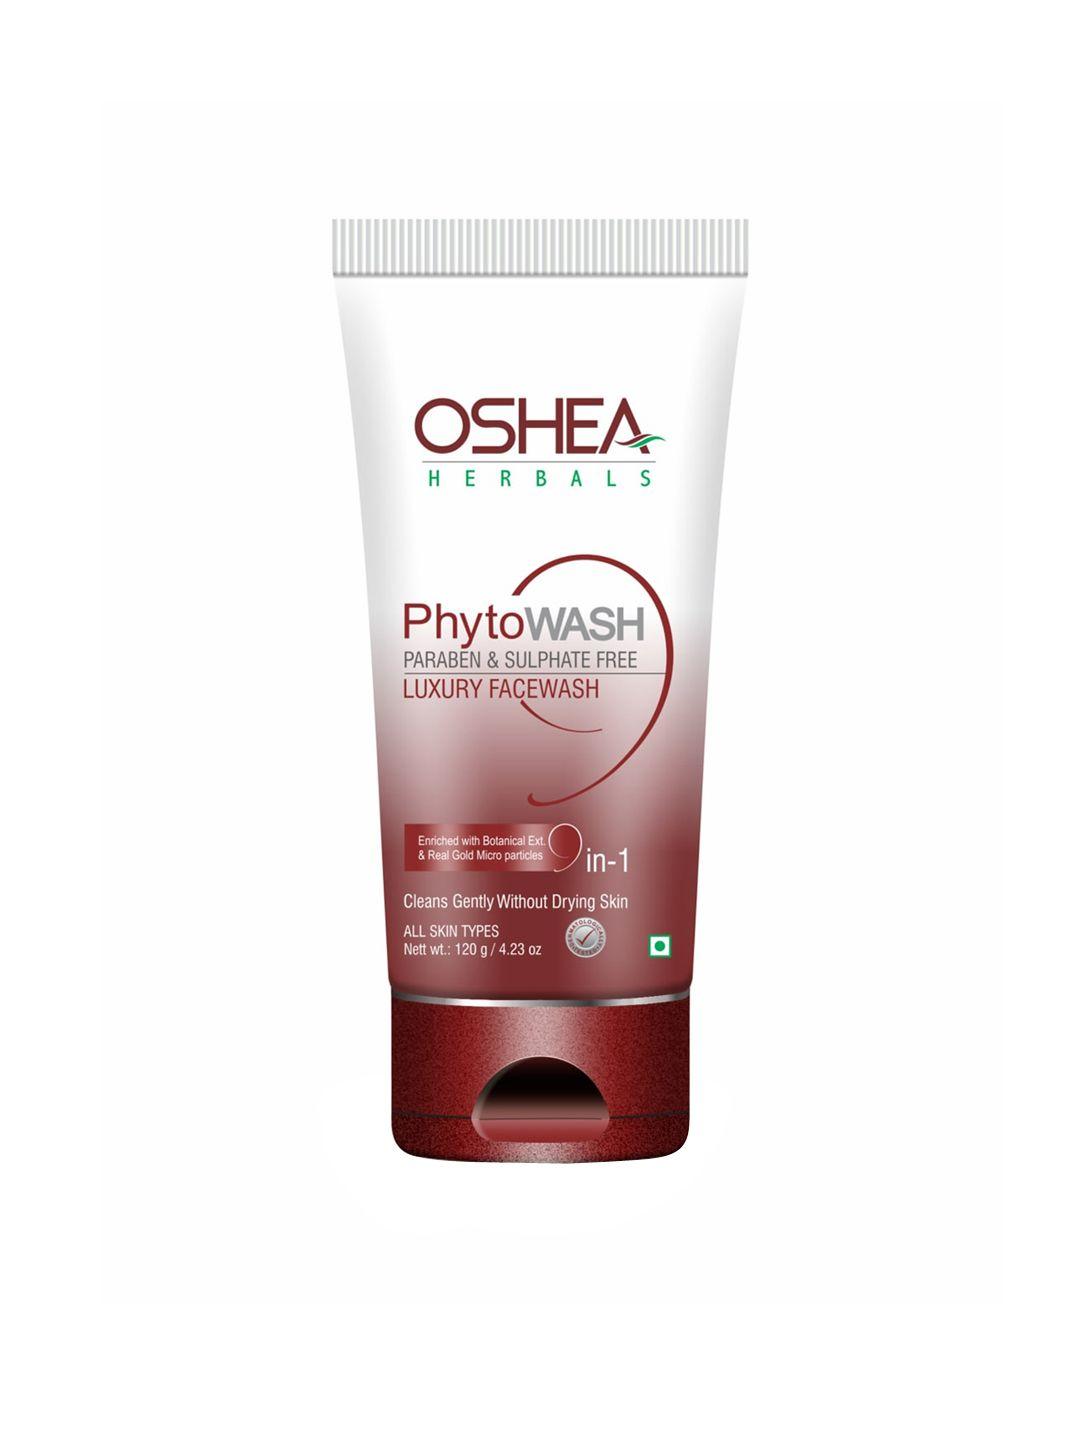 oshea herbals pack of 2 herbal facewash with aloe vera & real gold particles 120g